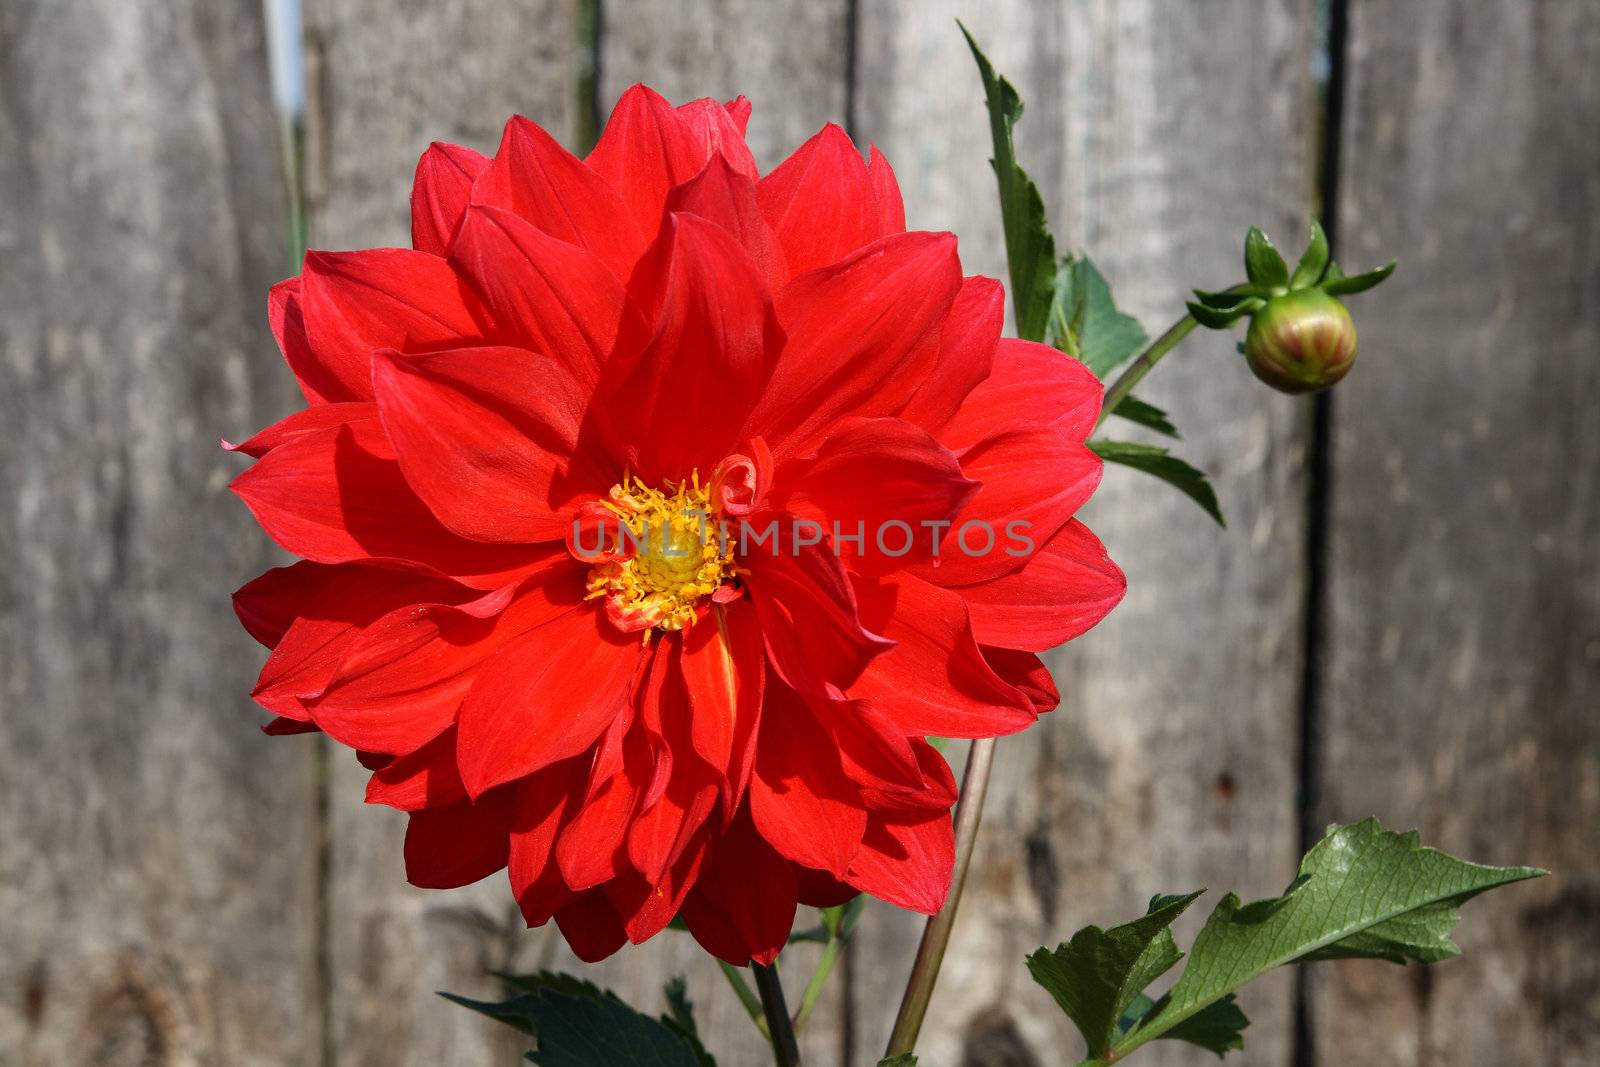 red bright dahlia flower on old wooden planks background